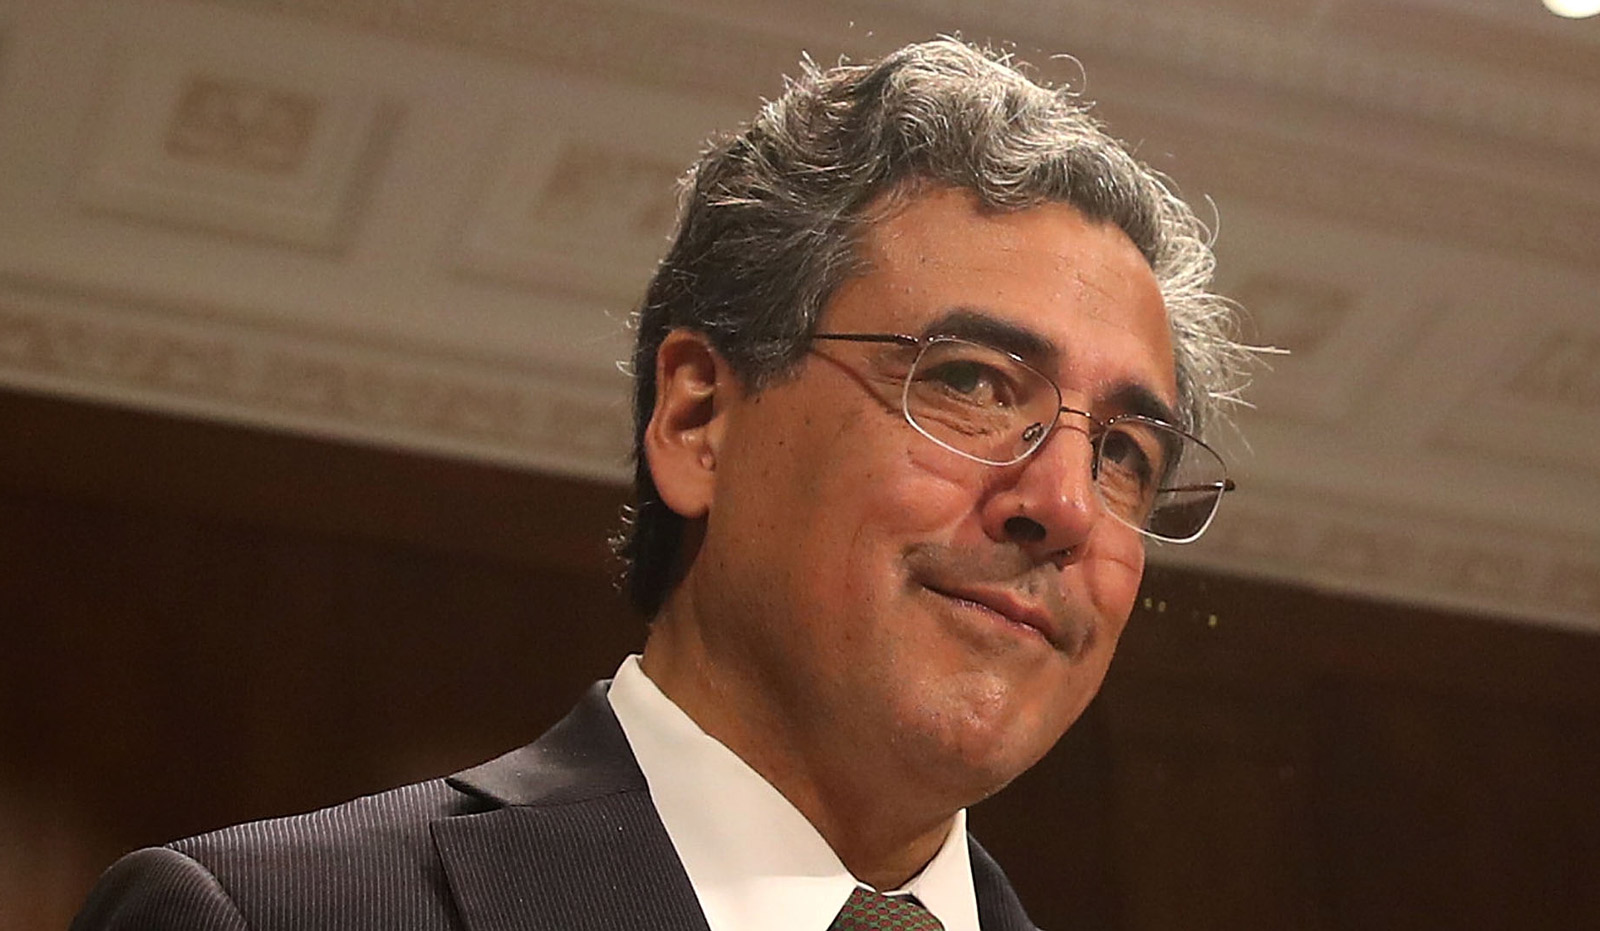 Noel Francisco attending his Senate Judiciary Committee confirmation hearing for the post of Solicitor General, Washington, D.C., May 10, 2017